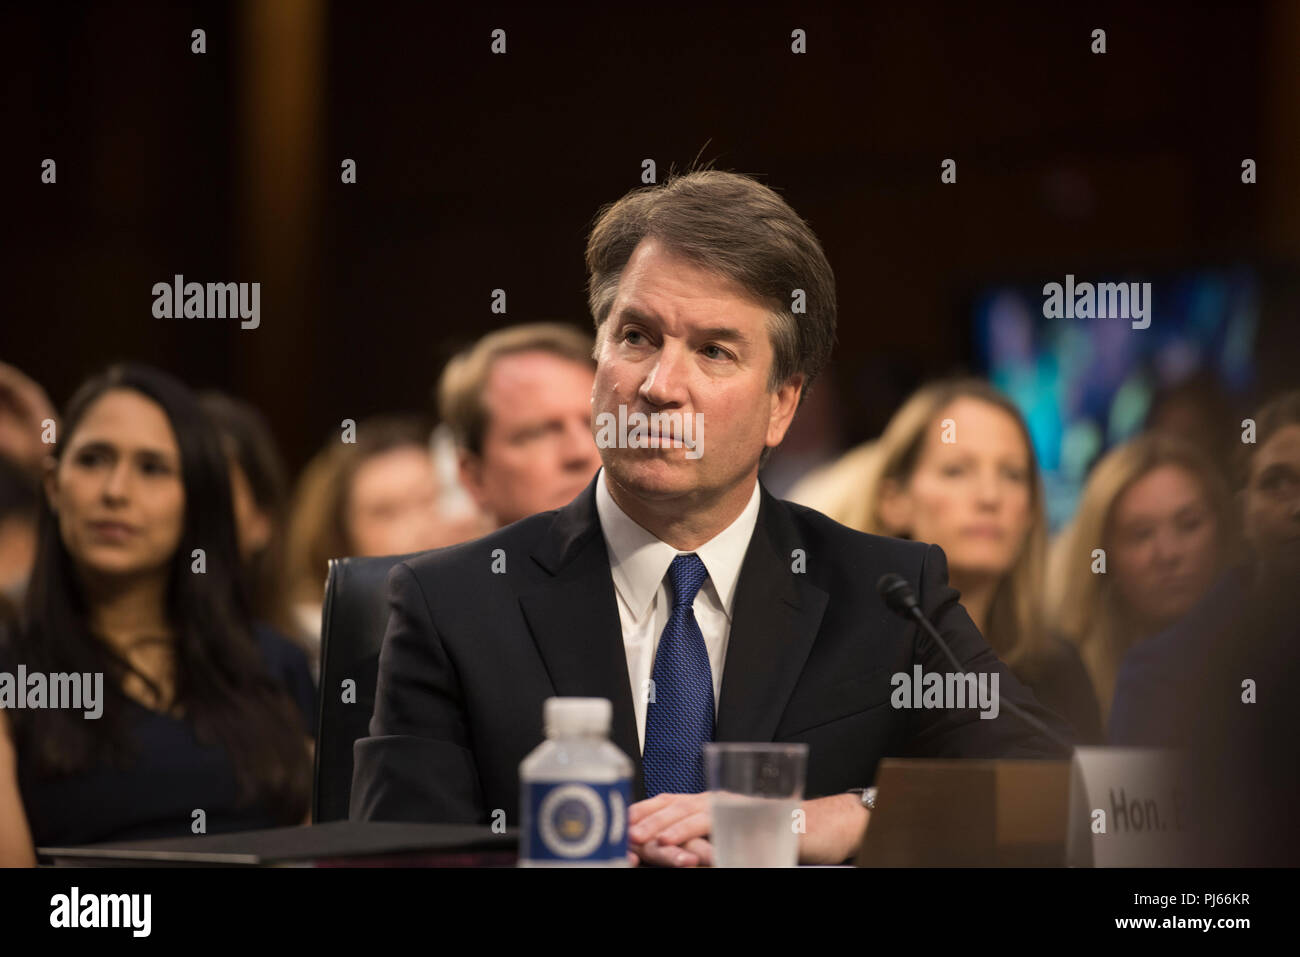 Washington DC, September 4, 2018, USA: Judge Brett Kavanaugh attends his confirmation hearing to become the next Supreme Court Justice on Capitol Hill in Washington DC. Patsy Lynch/ Stock Photo